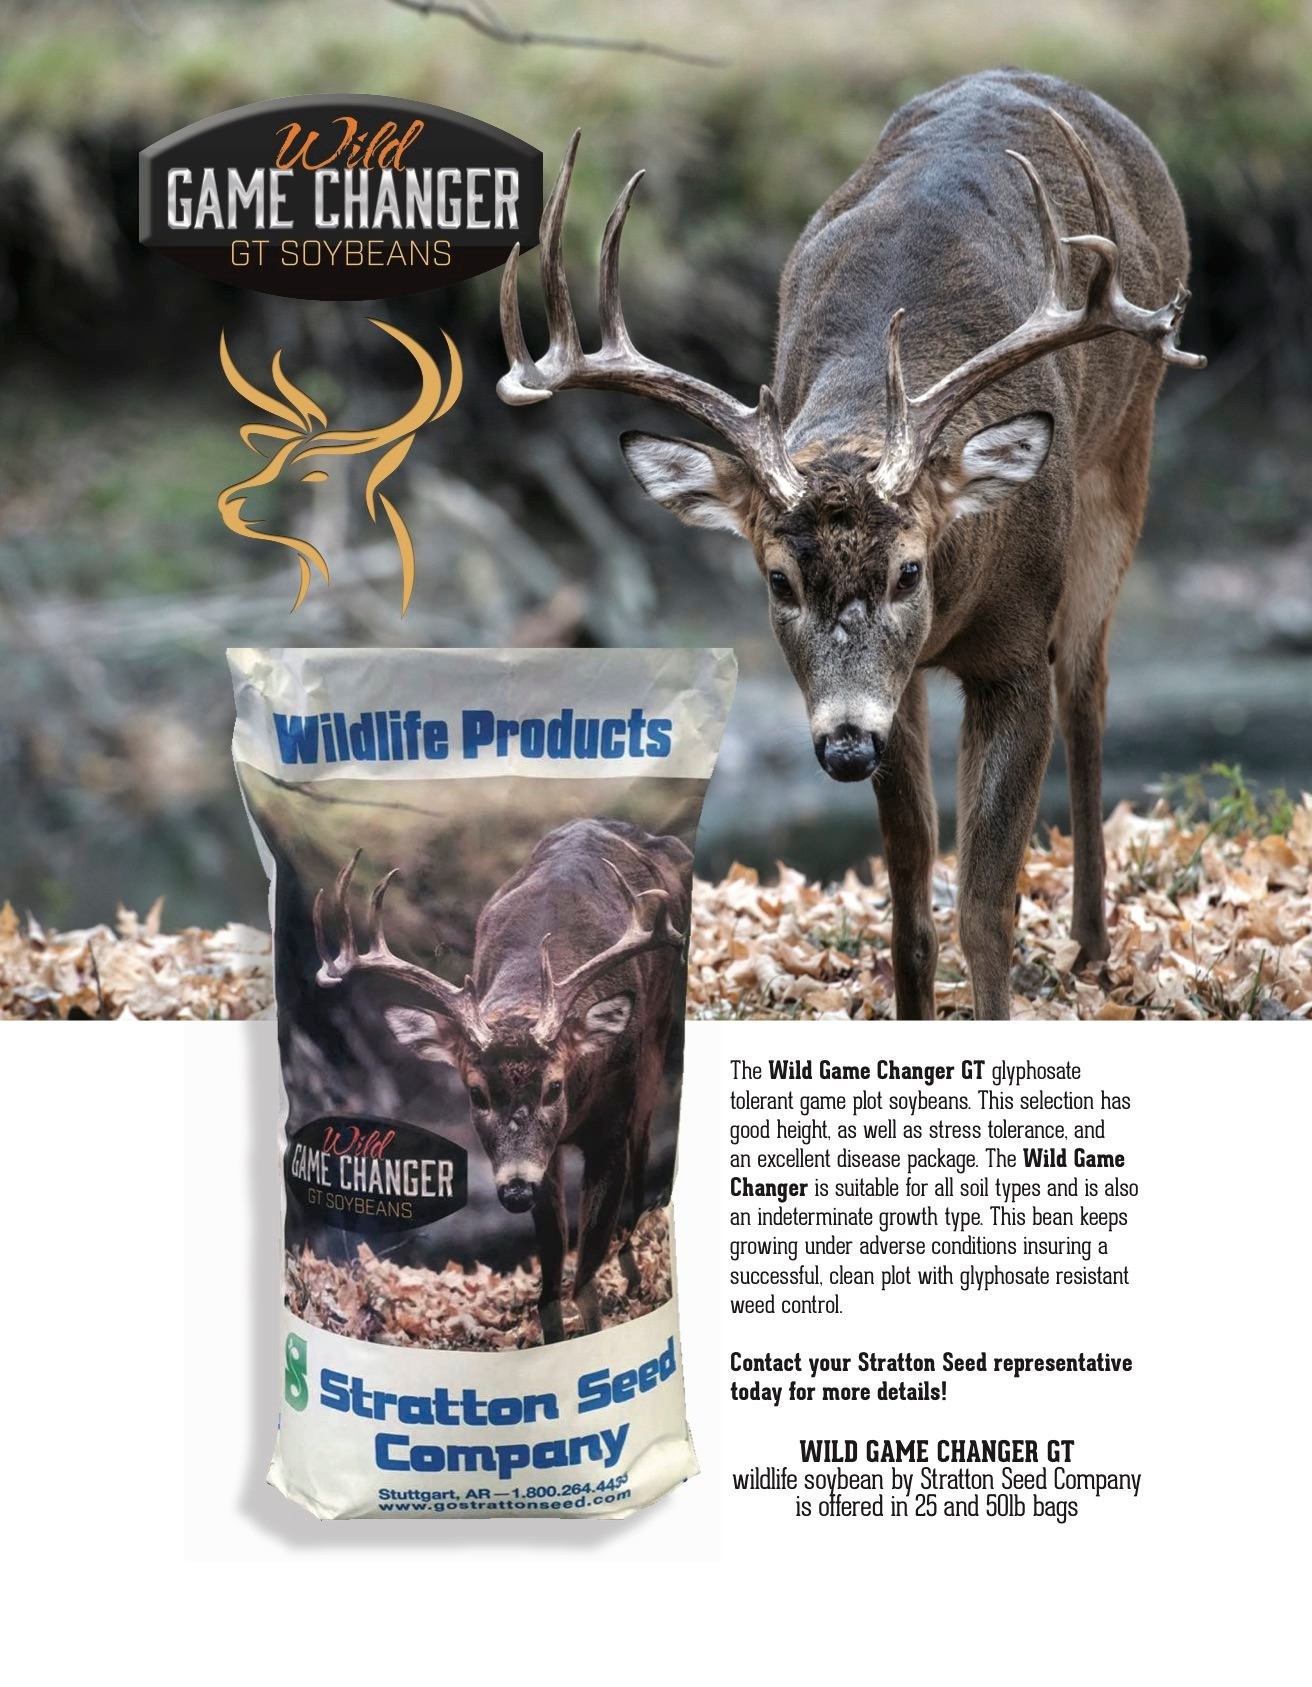 New Product: Wild Game Changer